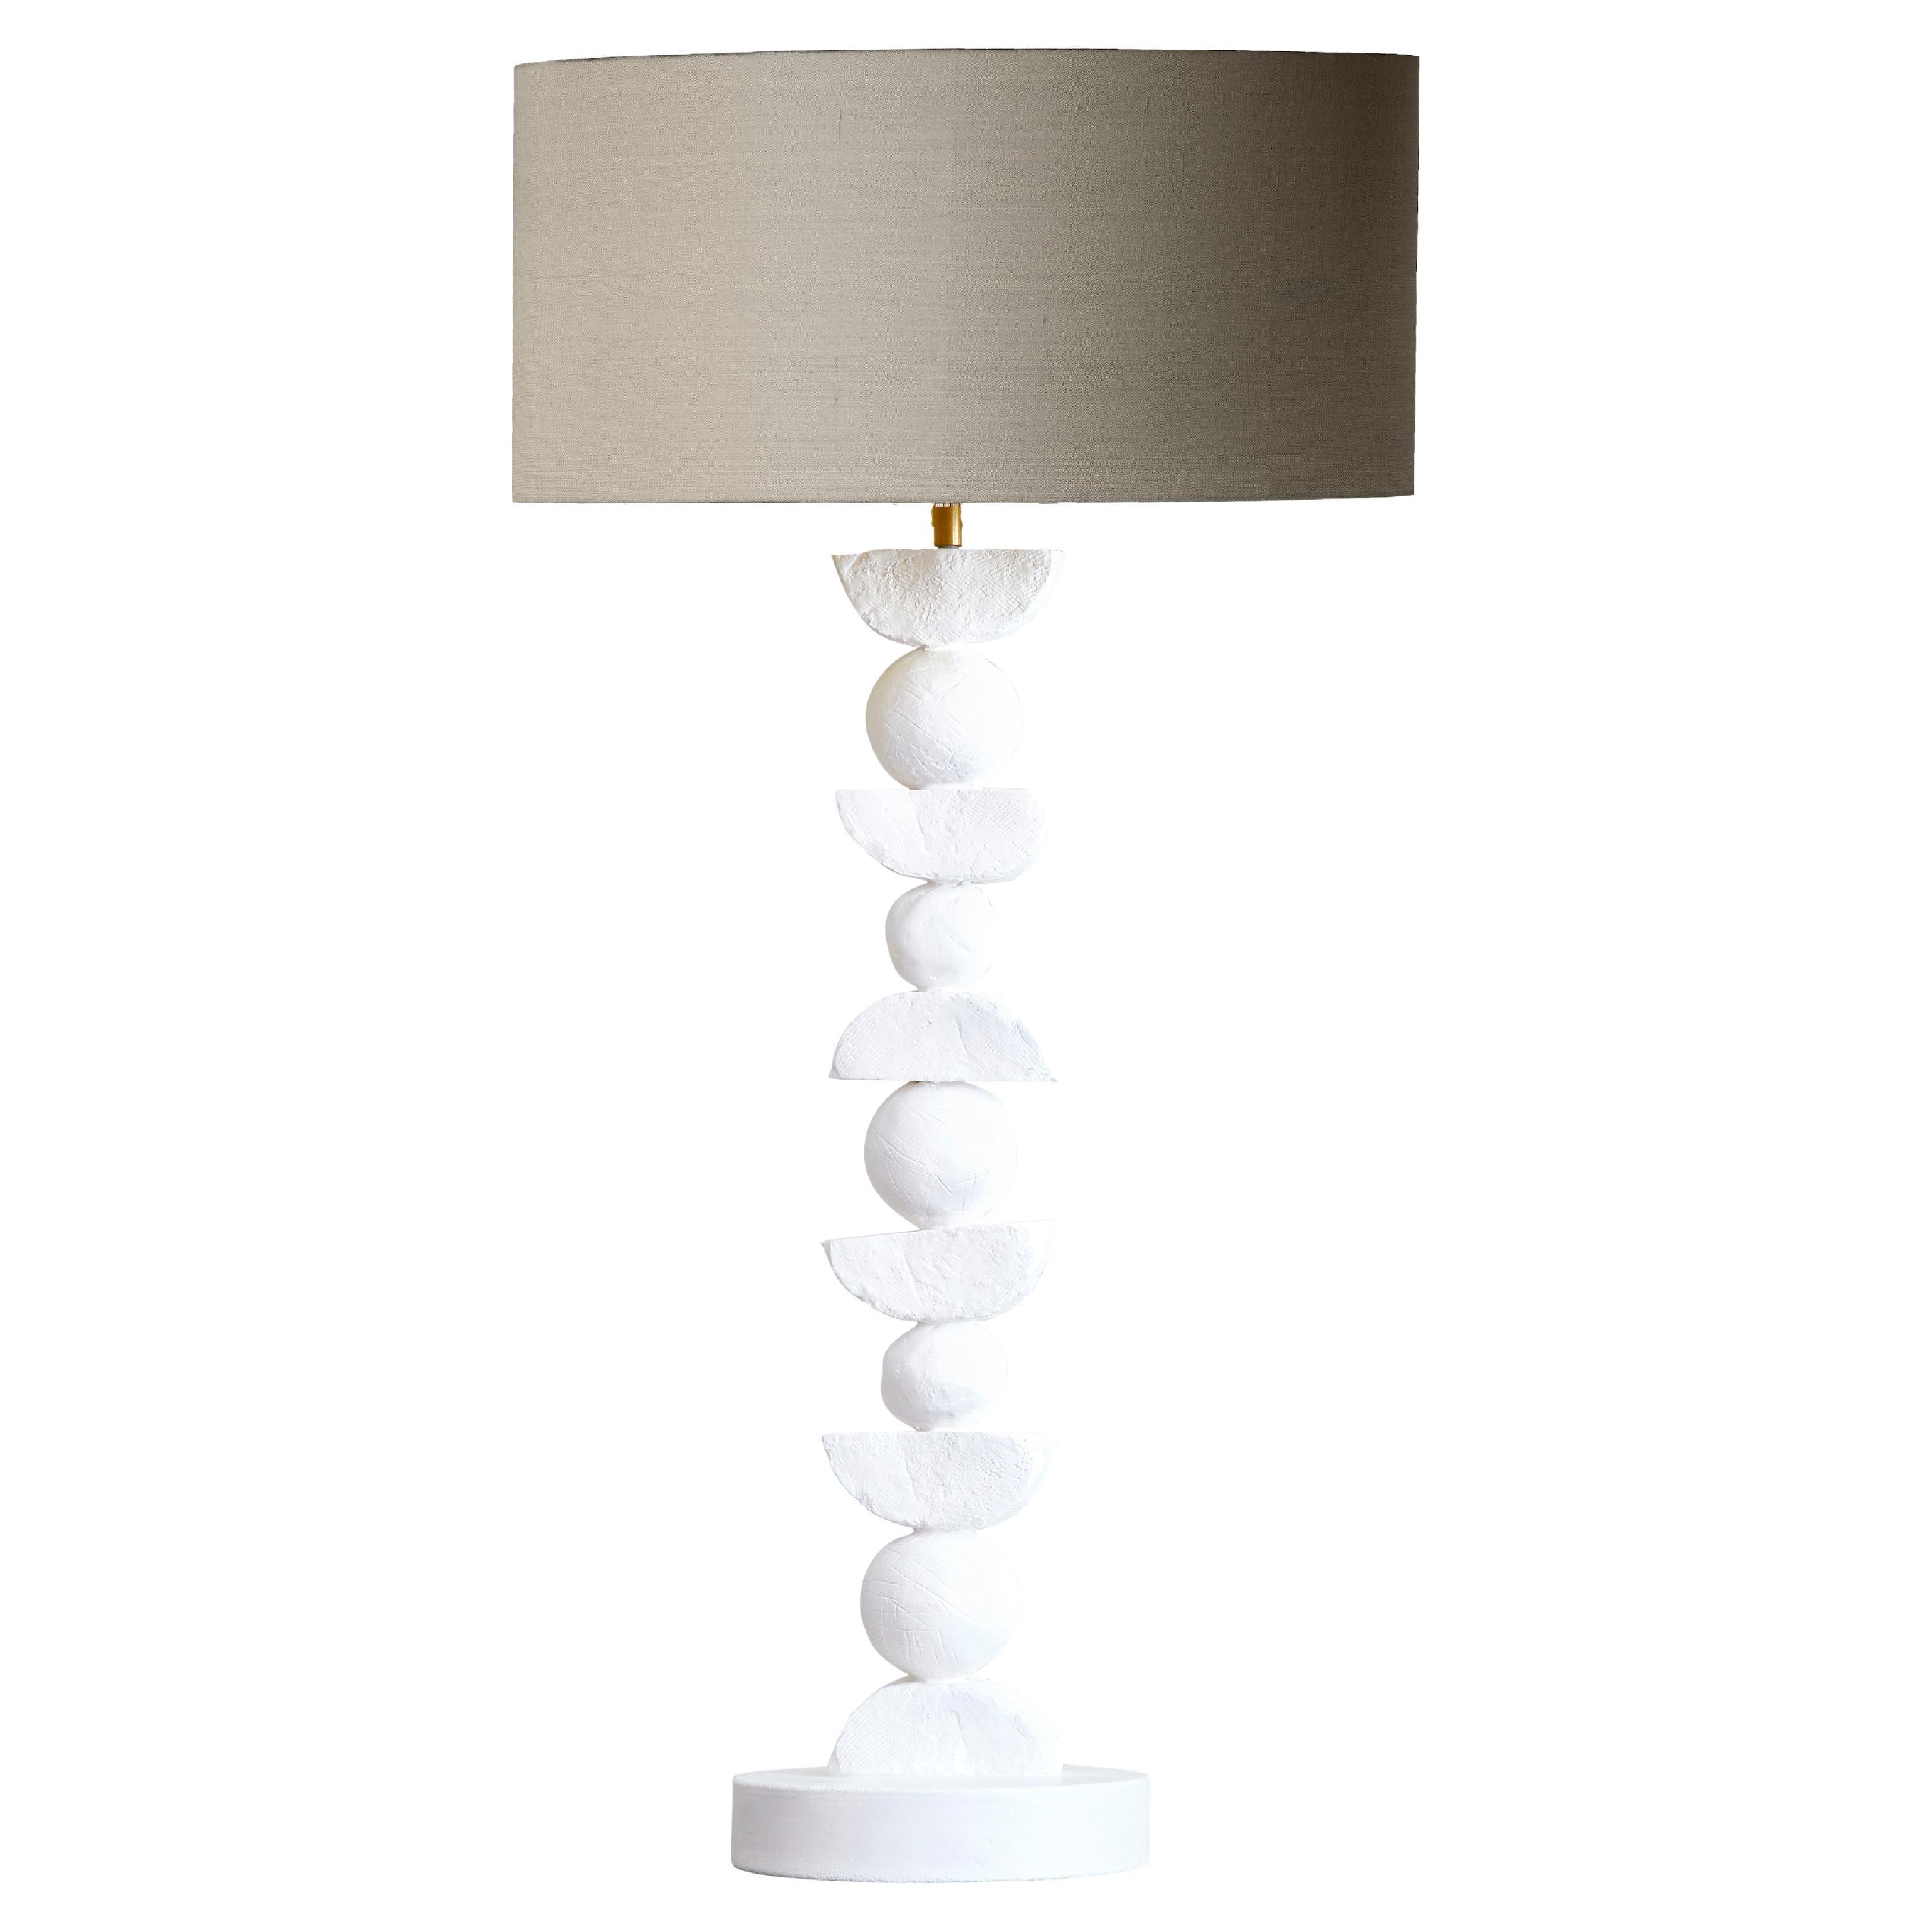 European Silhouette Table Lamp By, White Resin Table Lamp Target